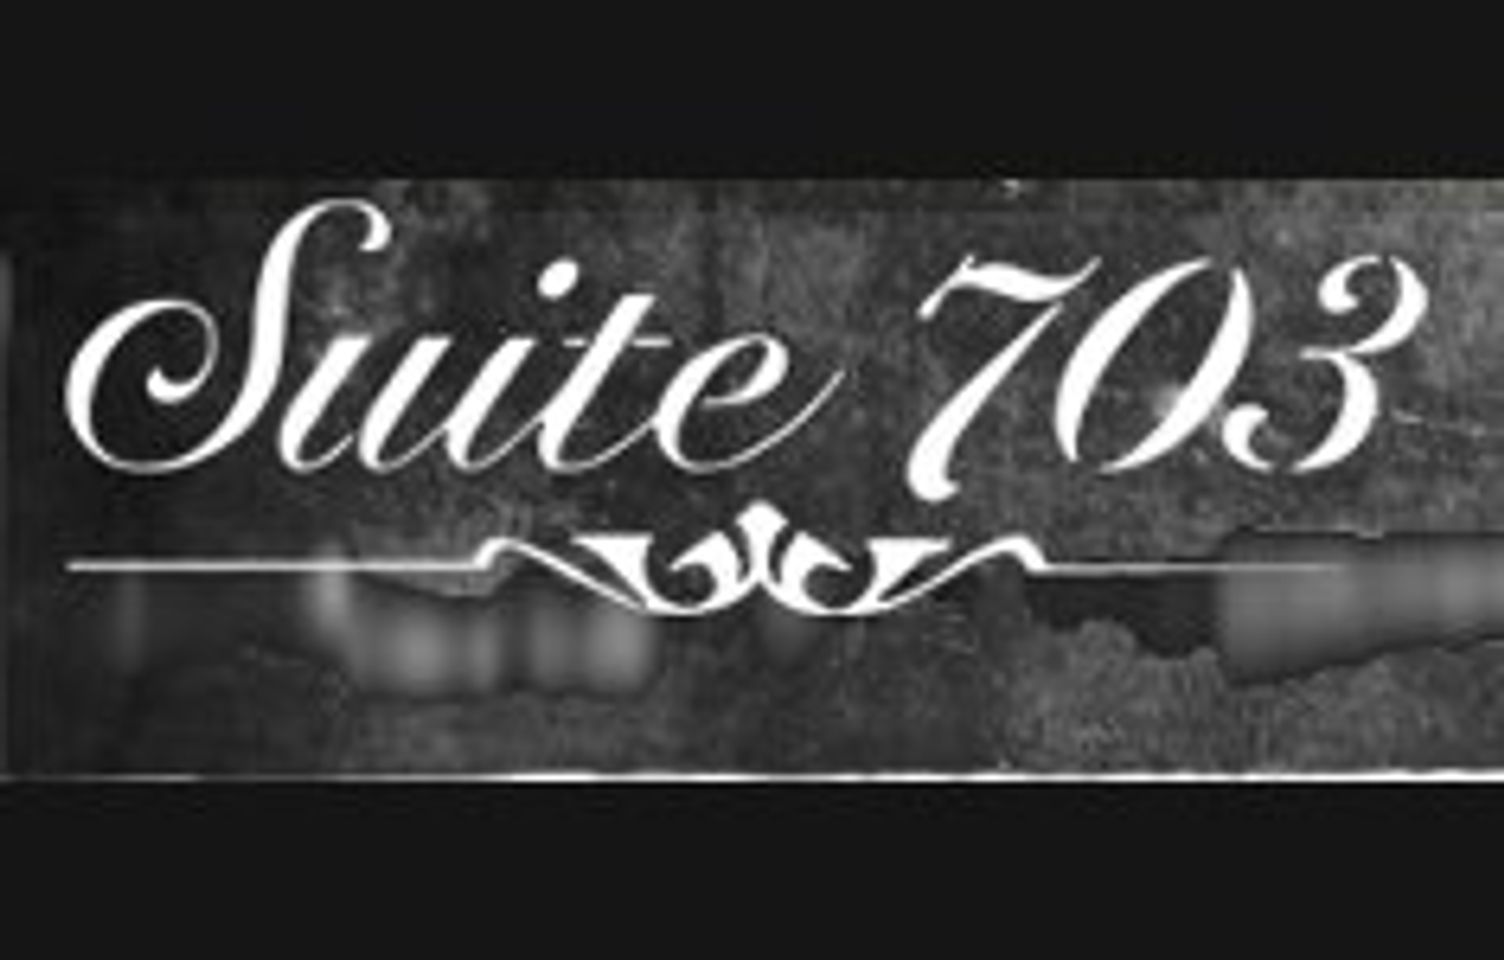 Suite 703 Announces New Brand Manager